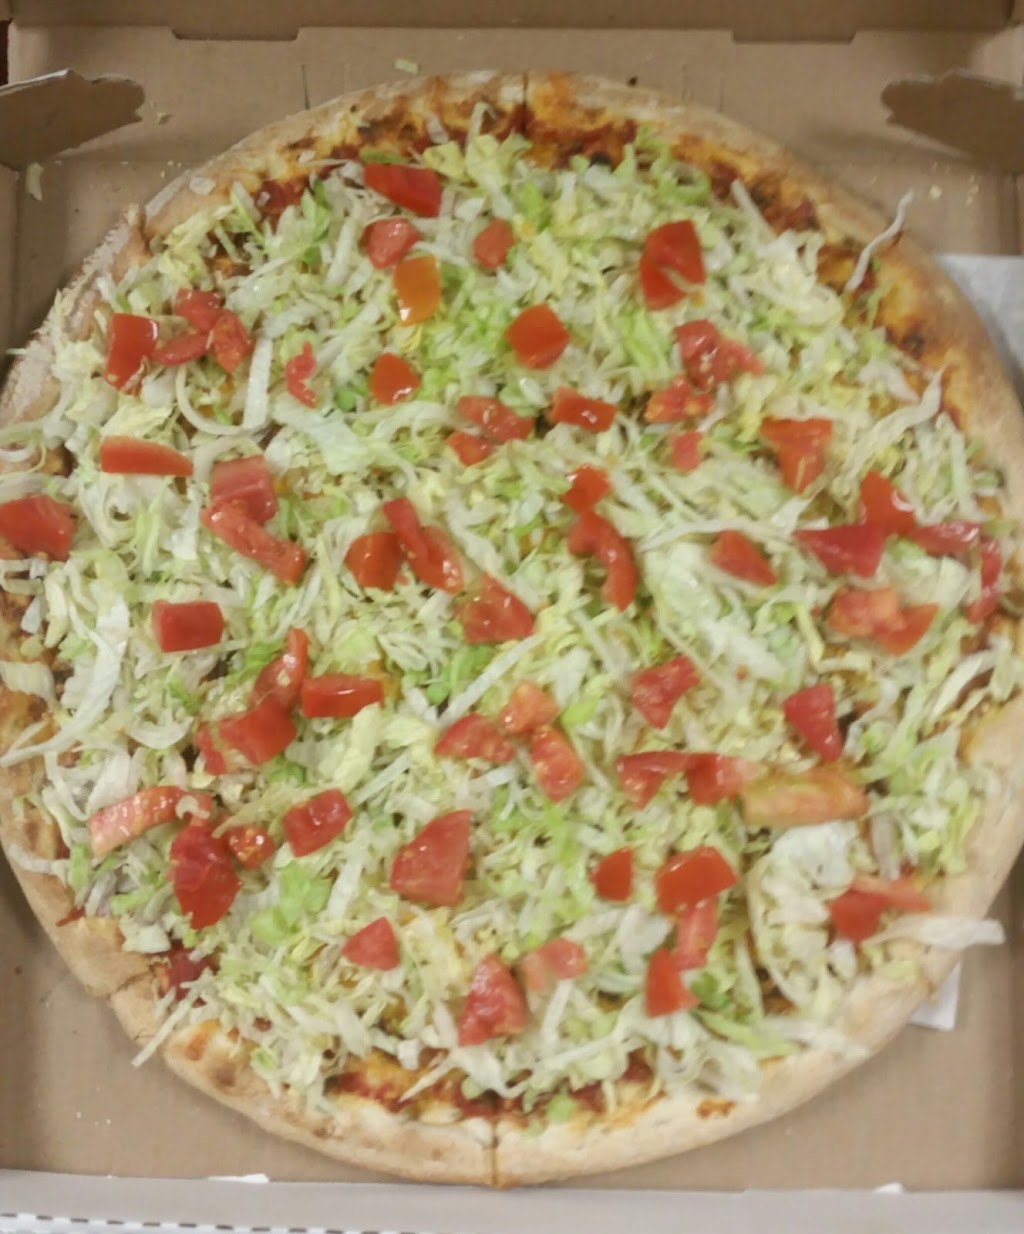 Two Guys Pizza | 3987 Walden Ave, Lancaster, NY 14086, USA | Phone: (716) 896-4897